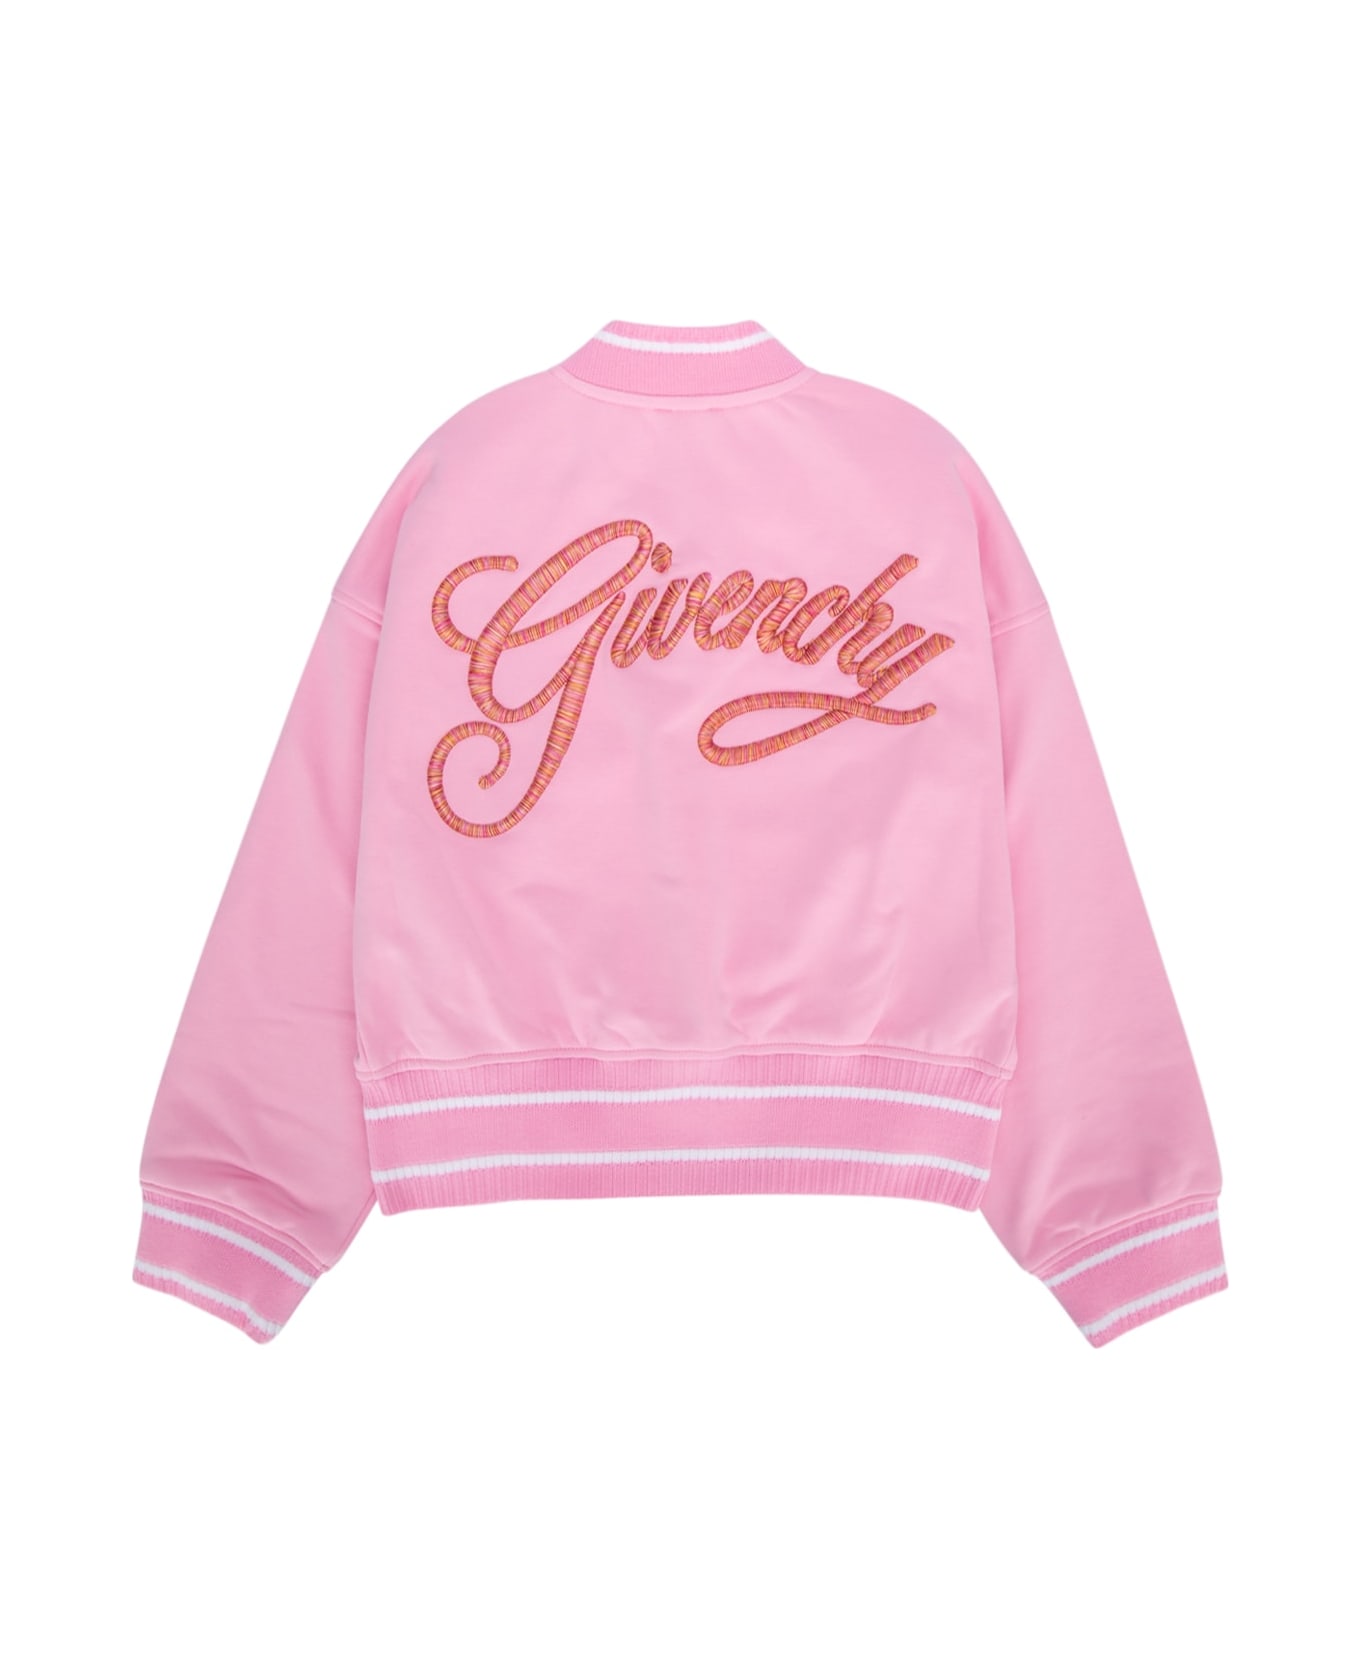 Givenchy Bomber - PINK